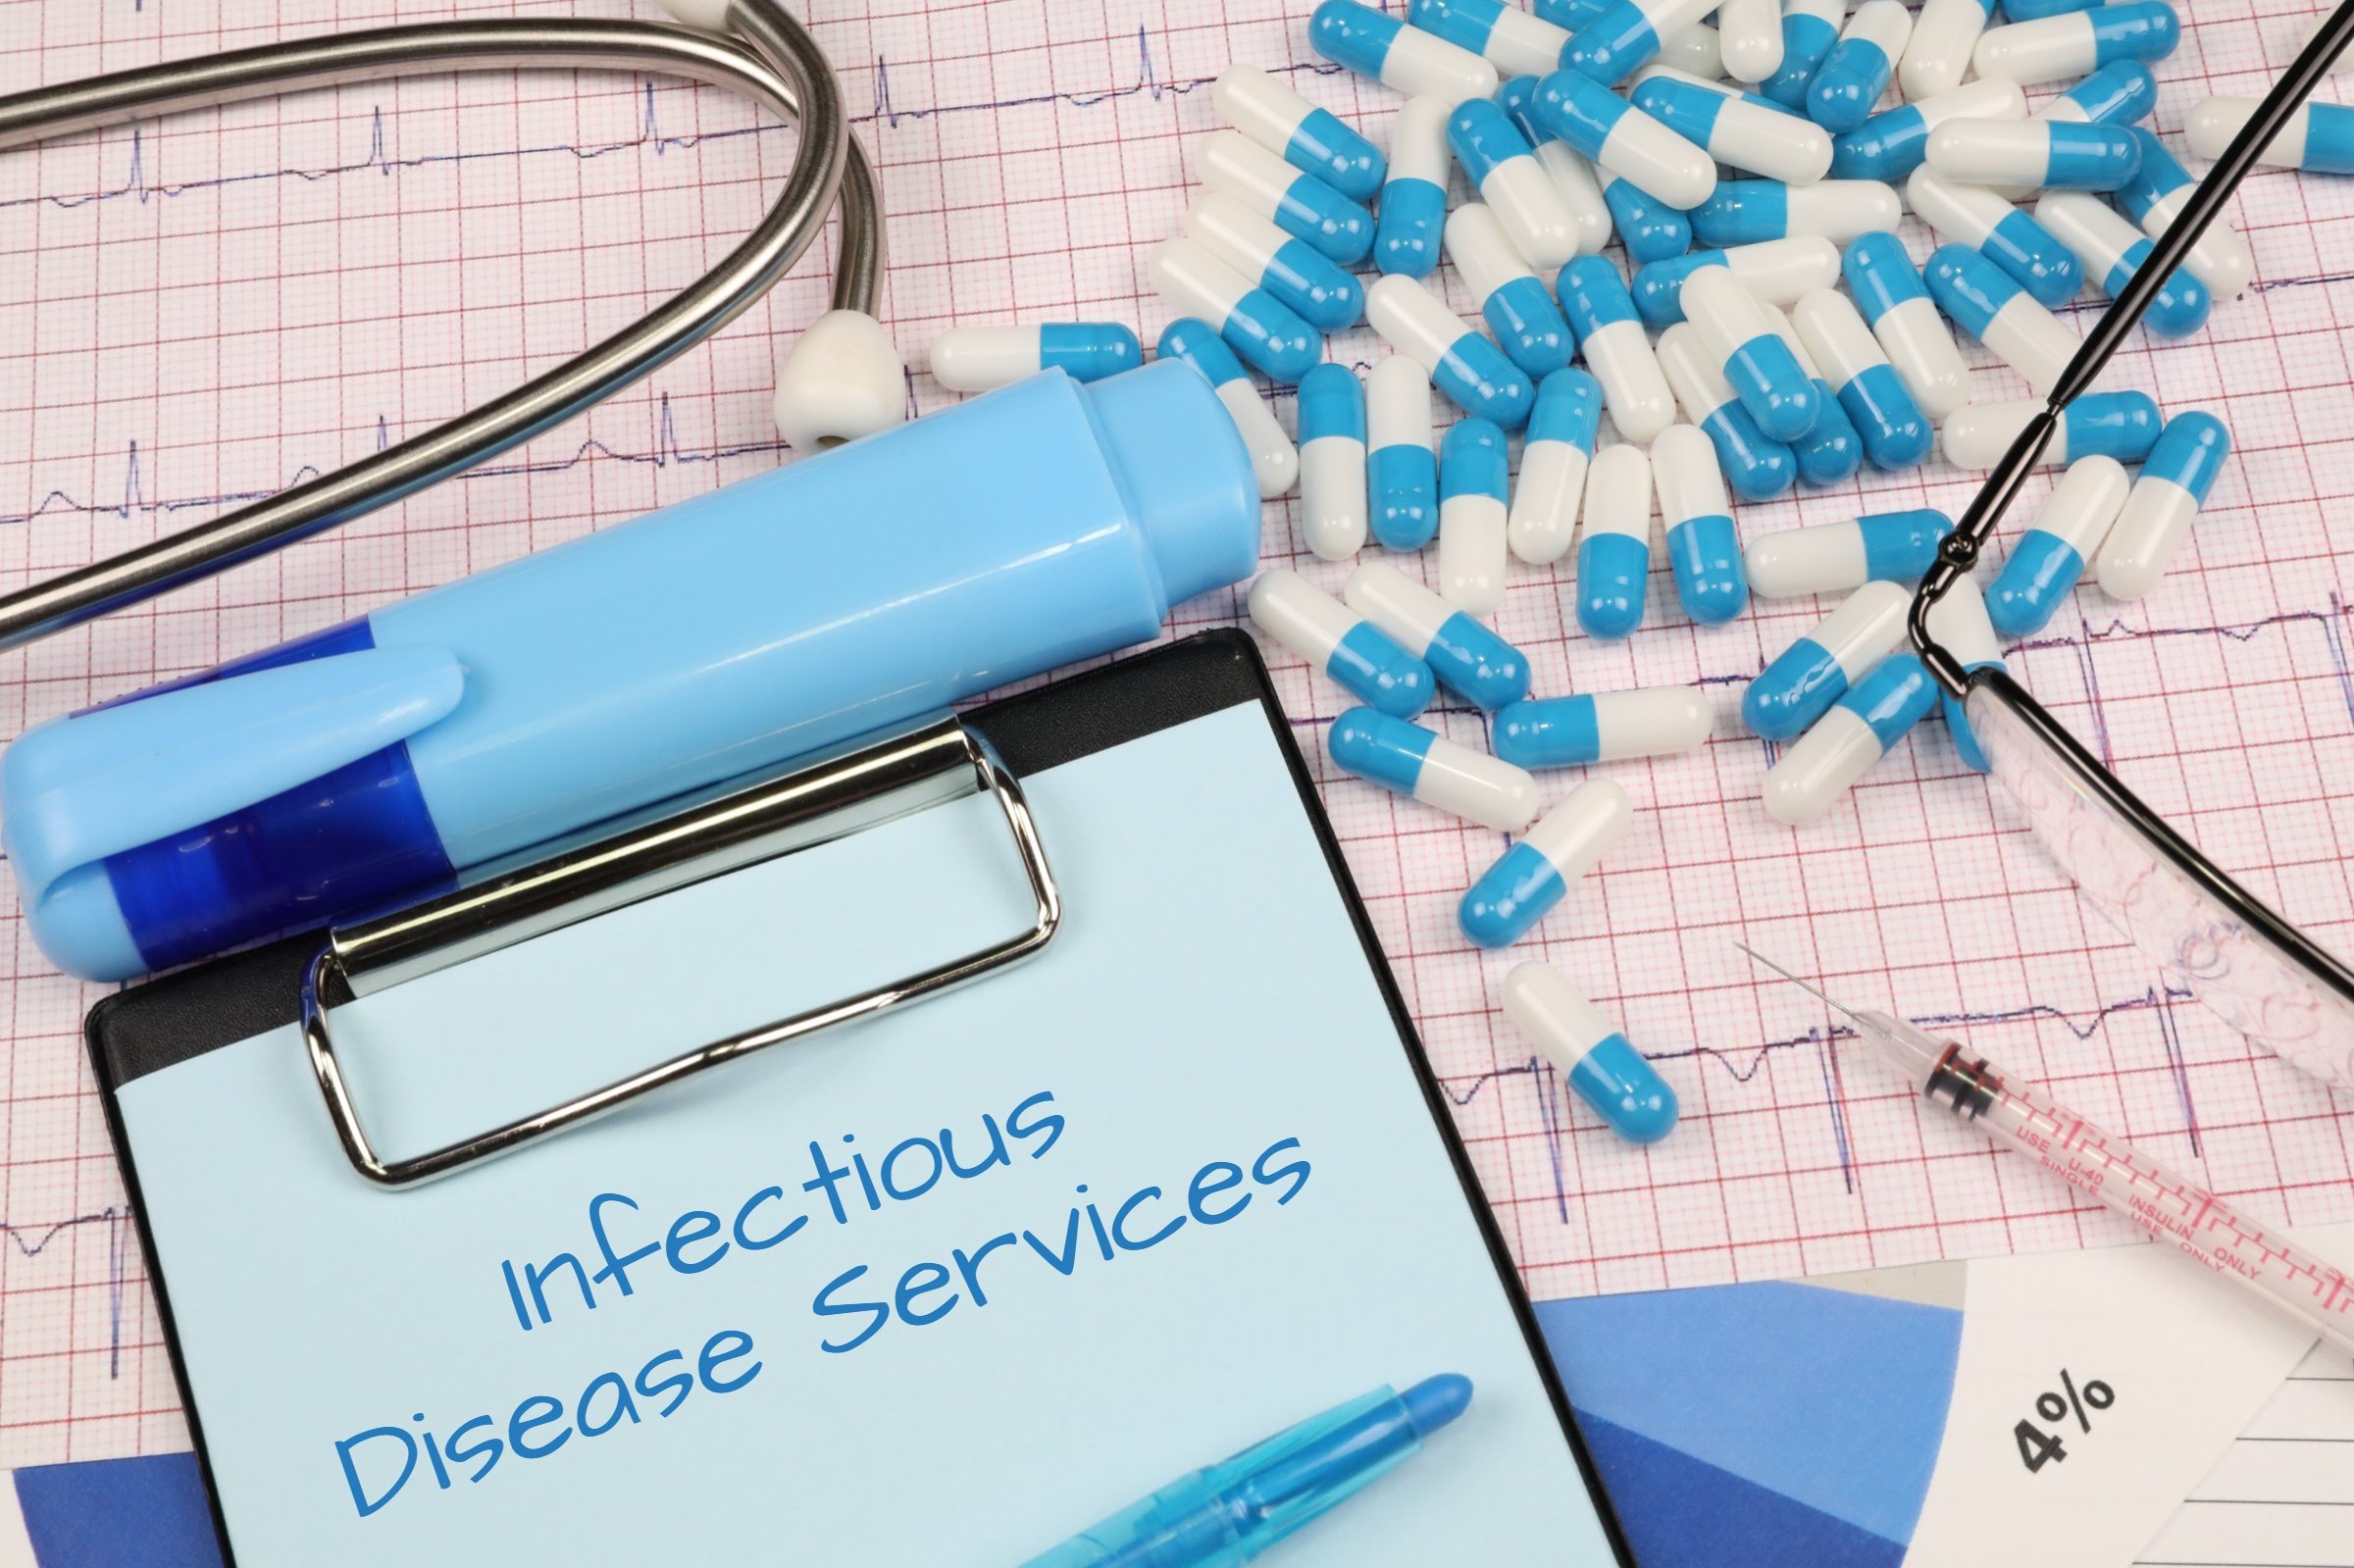 infectious disease services